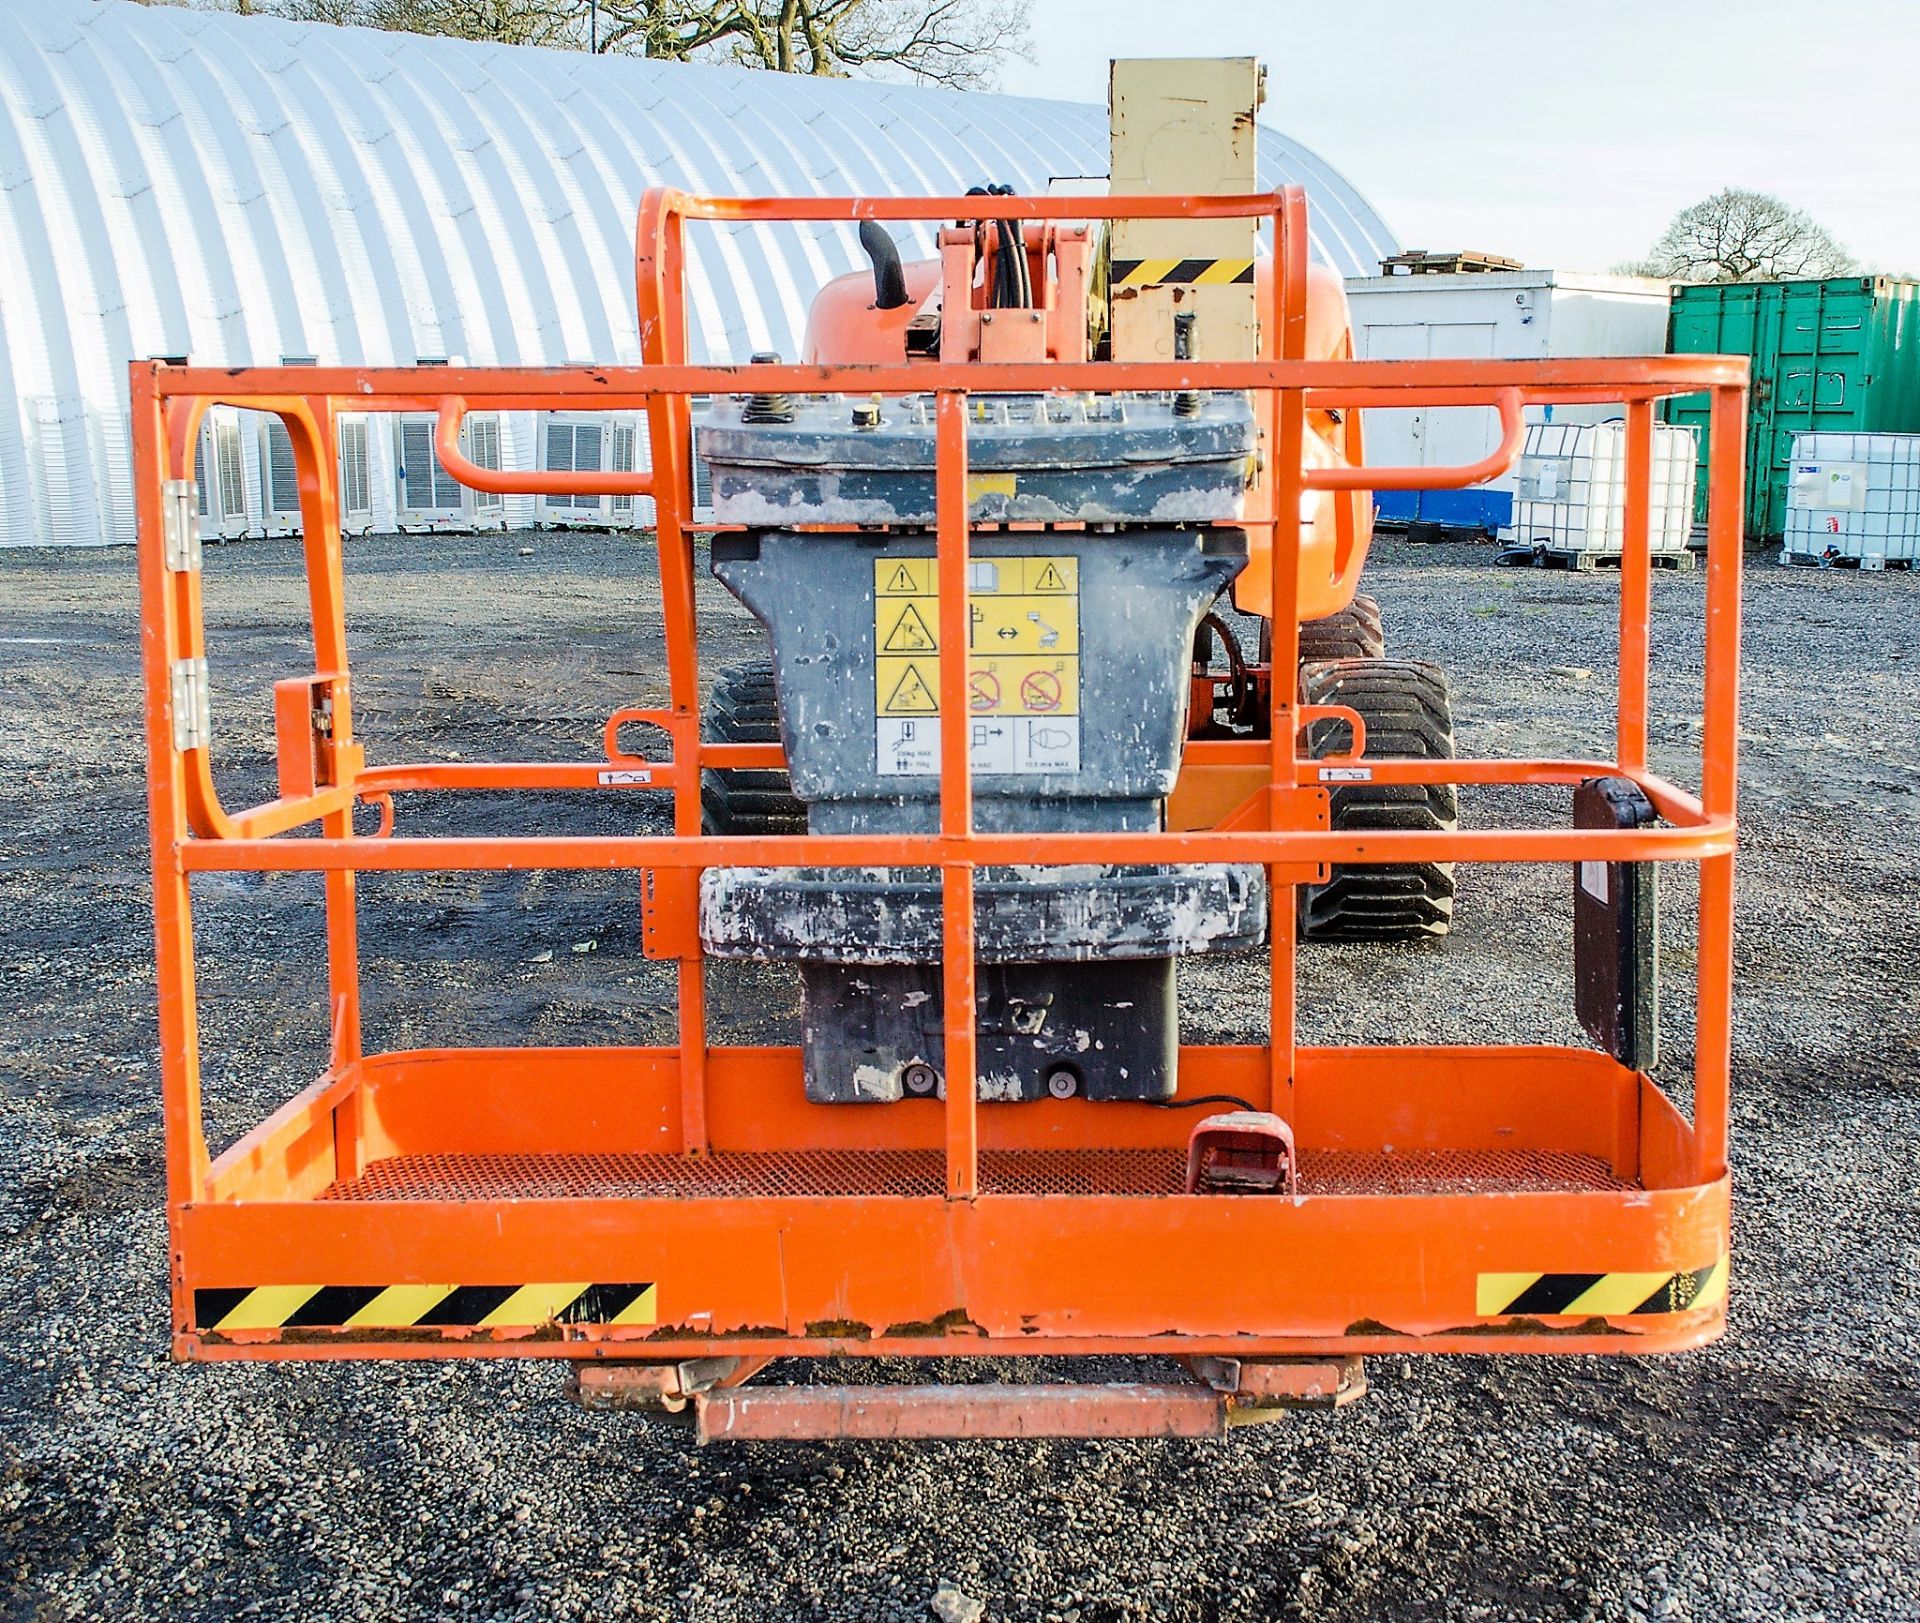 JLG 450AJ diesel driven rough terrain articulated boom access platform Year: 2007 S/N: 5190 Recorded - Image 5 of 17